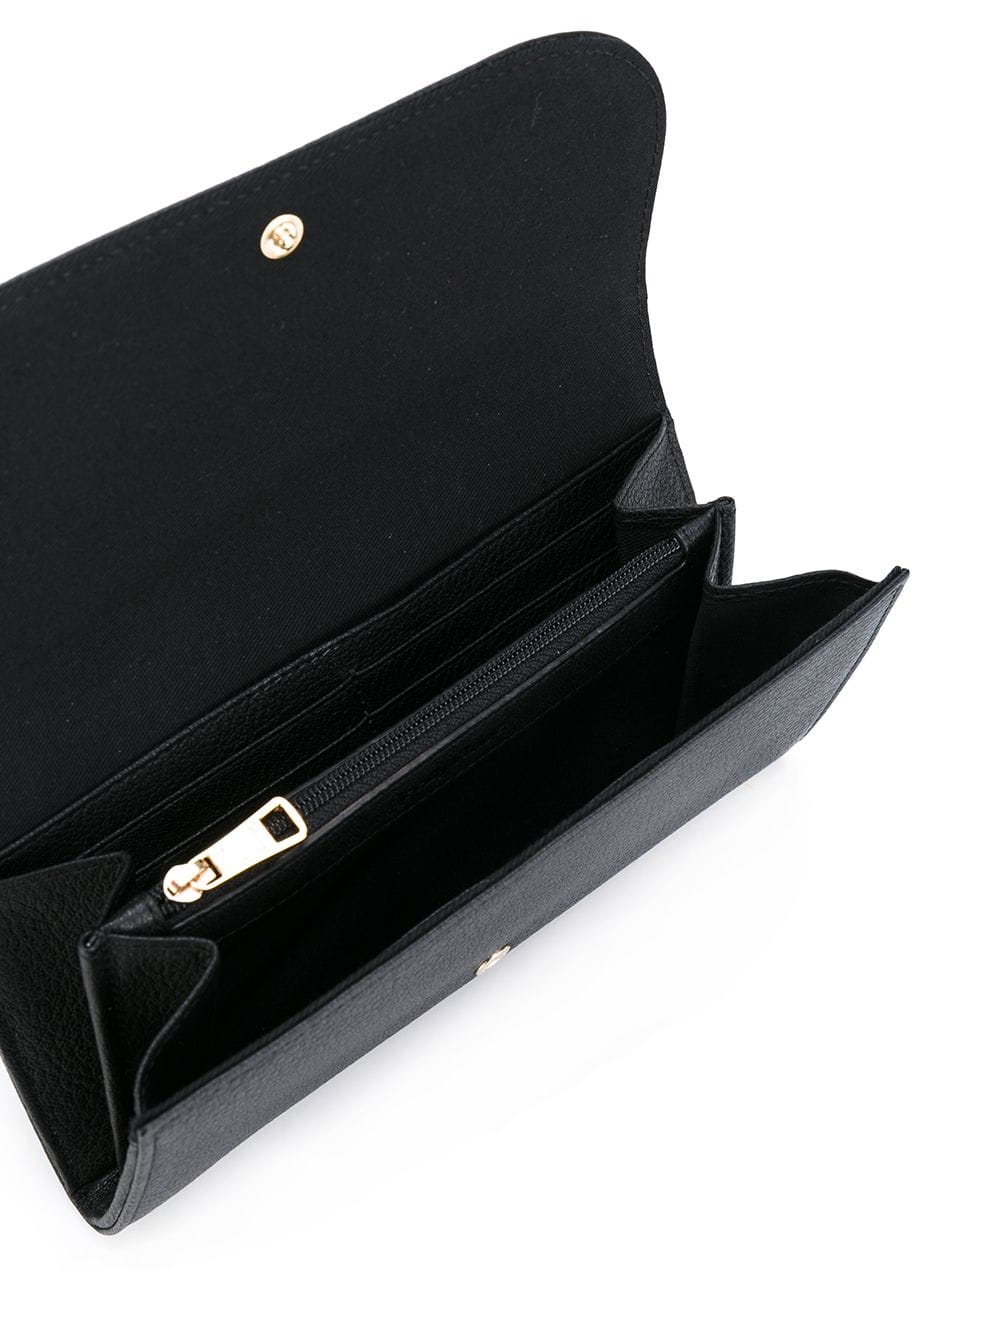 SEE BY CHLOE` BLACK LEATHER WALLET